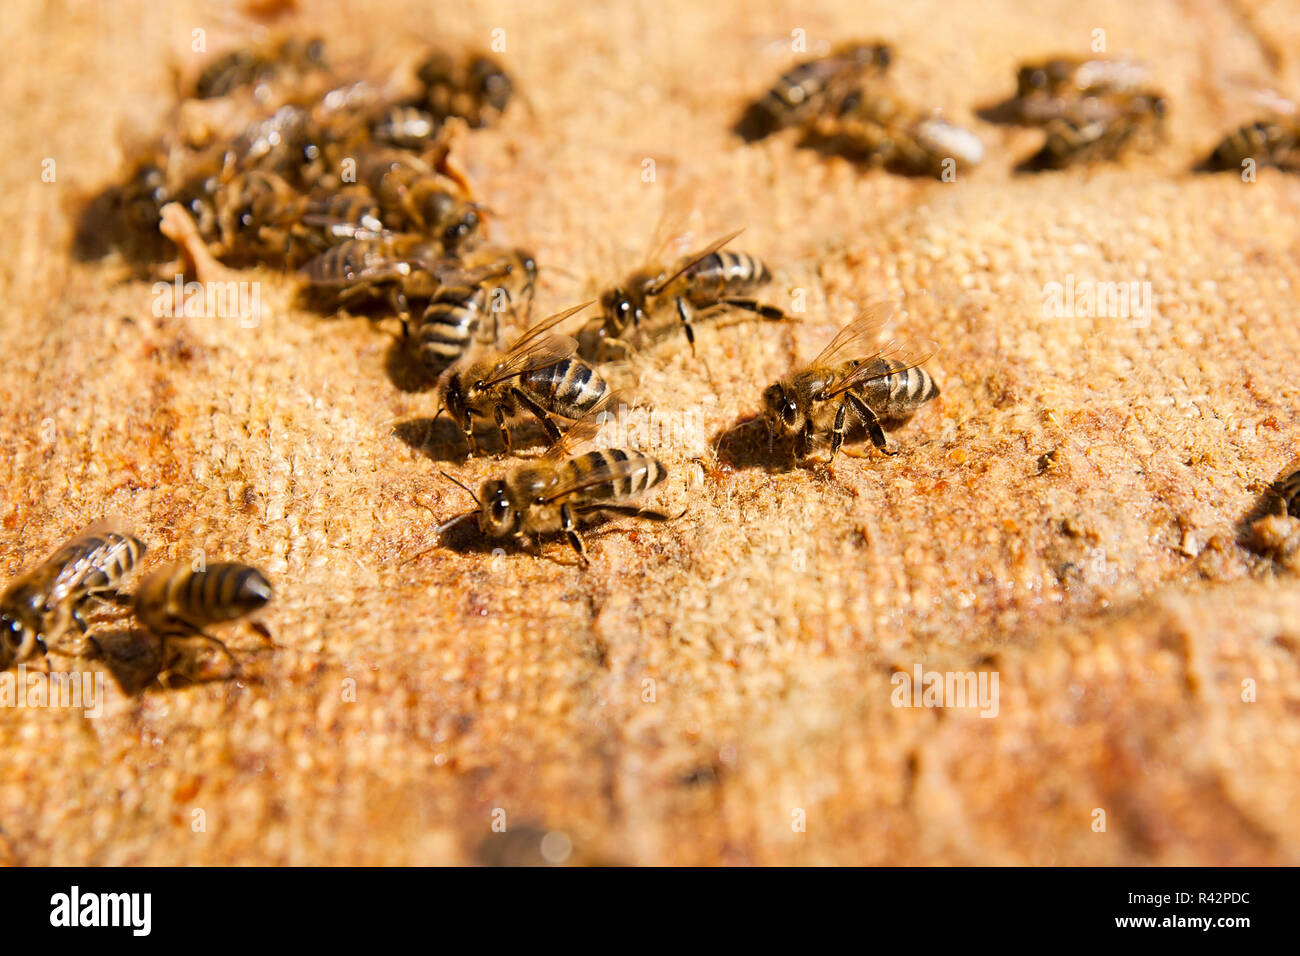 Busy bees, close up view of the working bees. Stock Photo